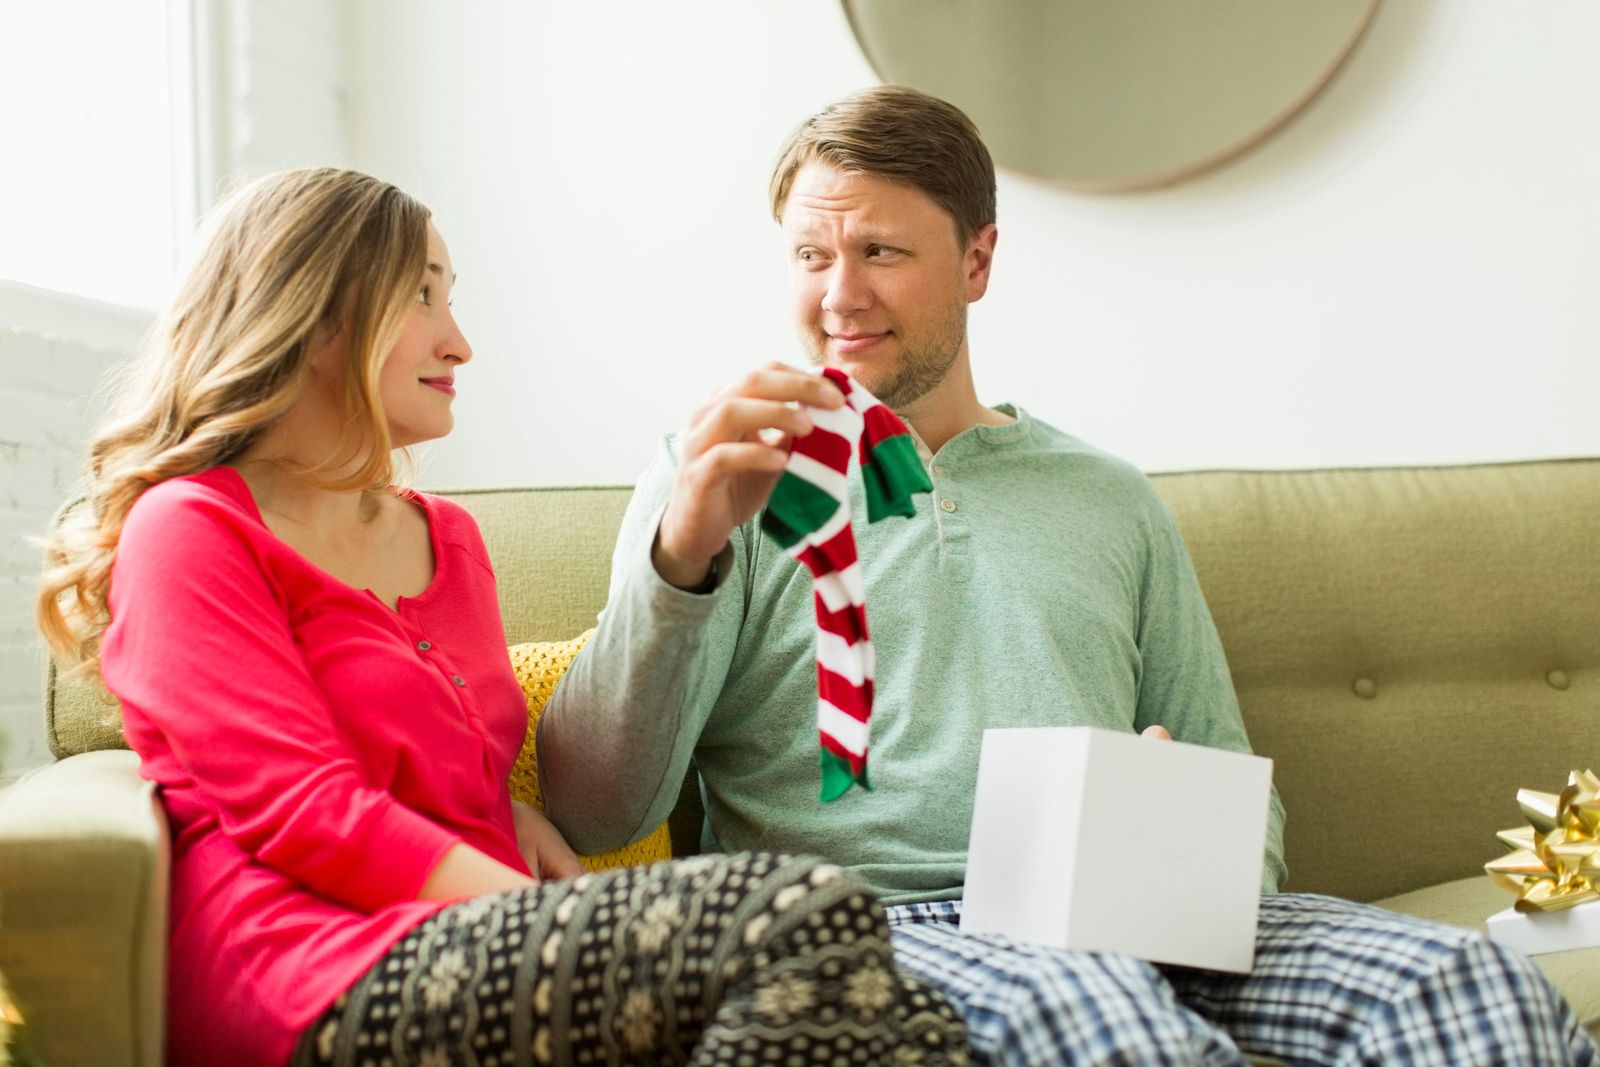 5 Scientifically Proven Ways to Make Your Gifts Meaningful